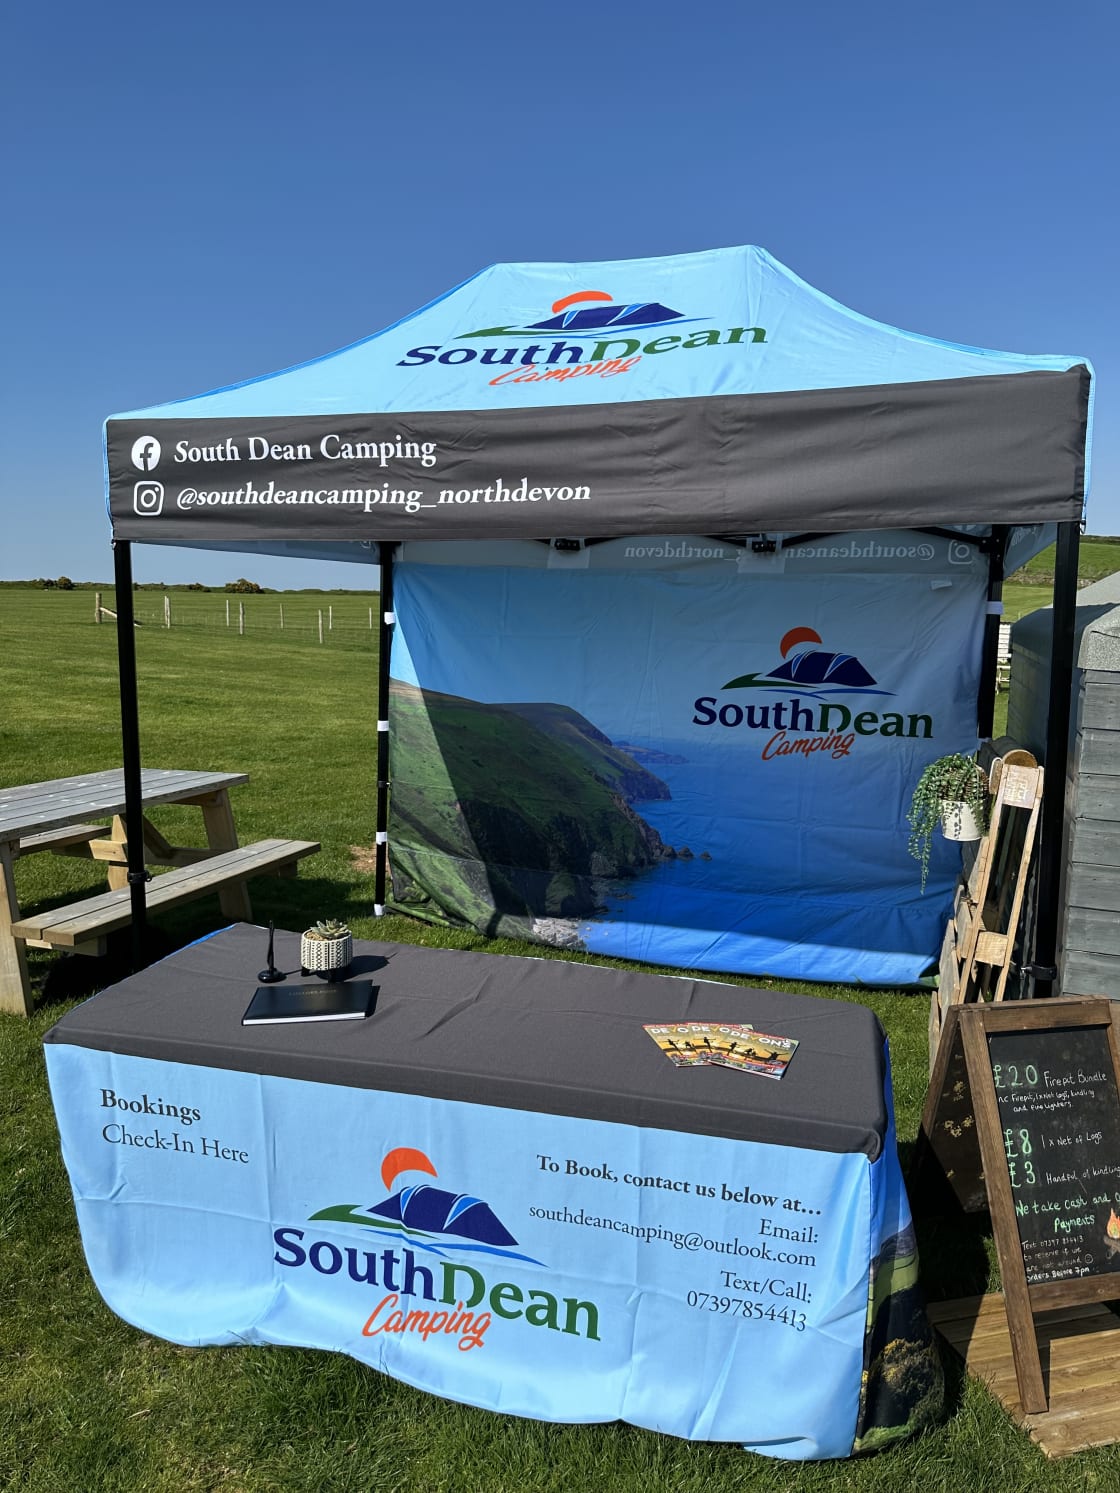 South Dean Camping